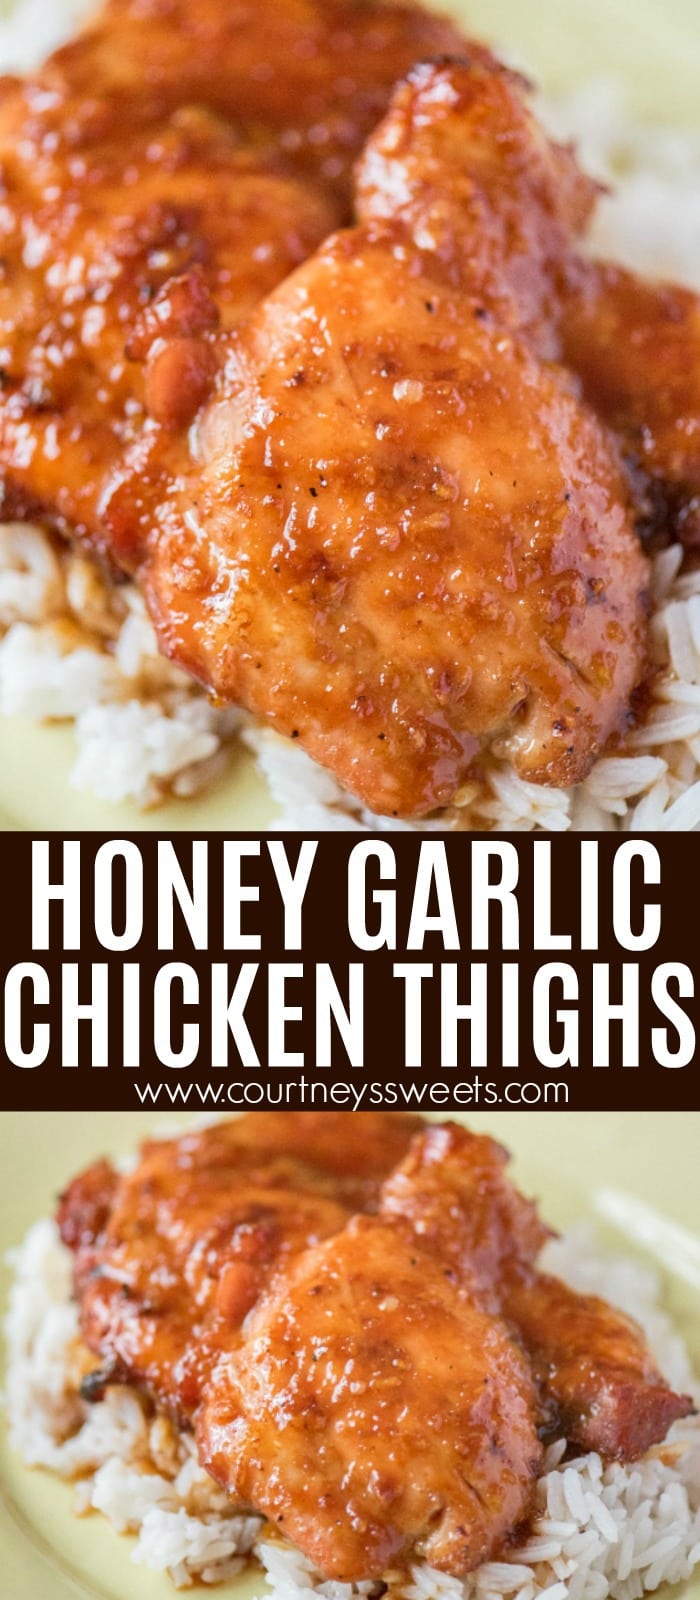 These Honey Garlic Chicken Thighs cook up right in the oven in just 35 minutes. The honey garlic sauce is good enough to eat with a spoon!